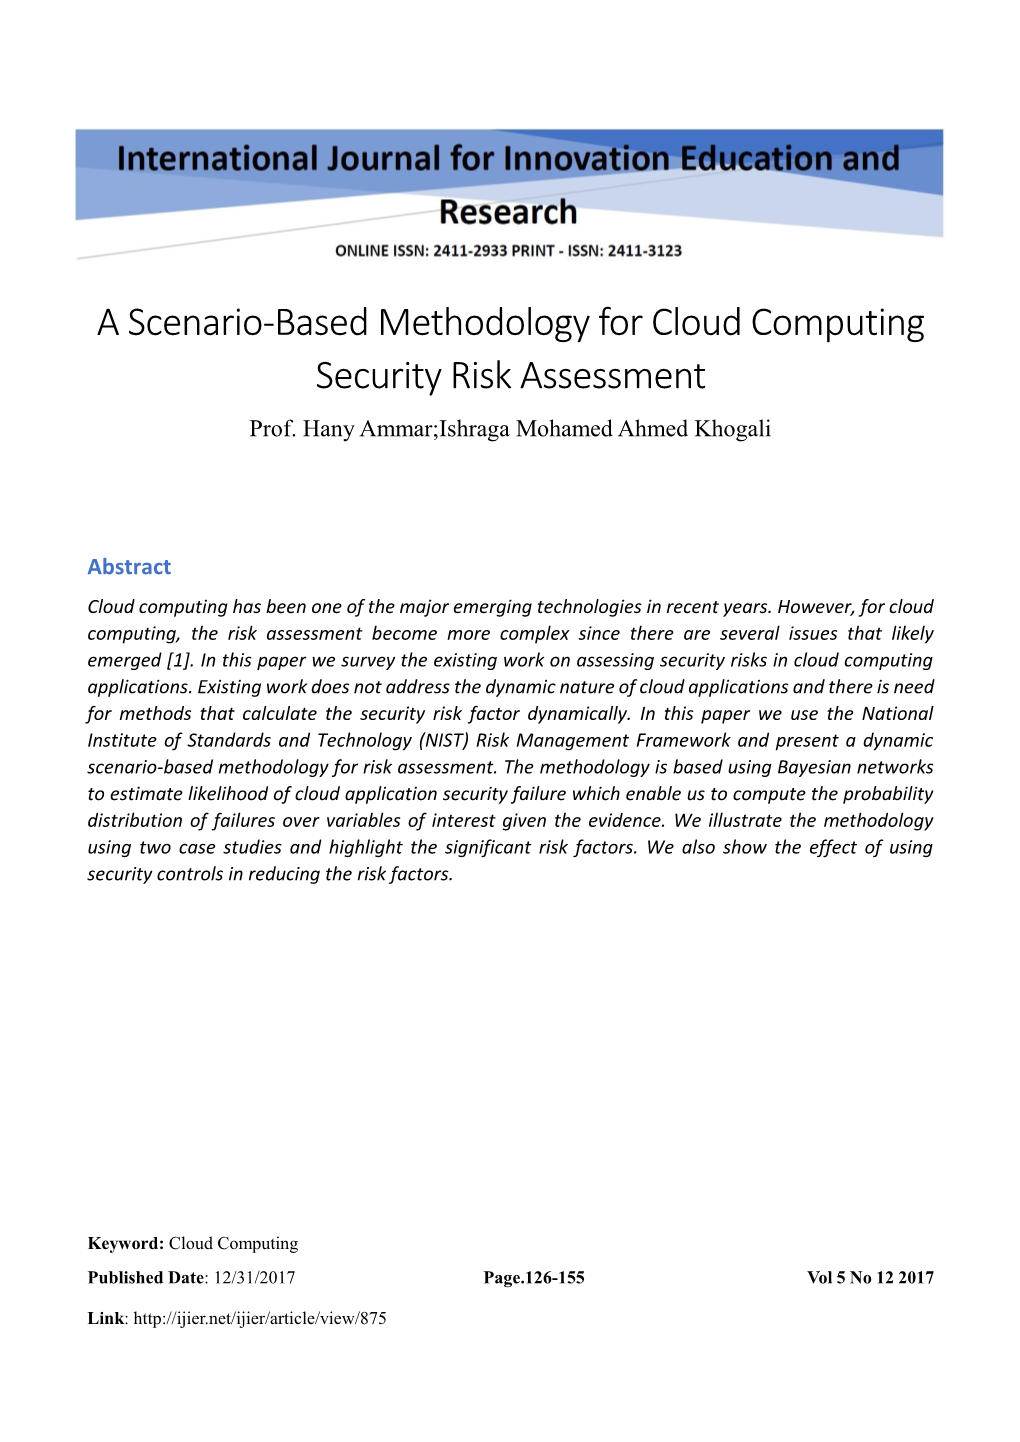 A Scenario-Based Methodology for Cloud Computing Security Risk